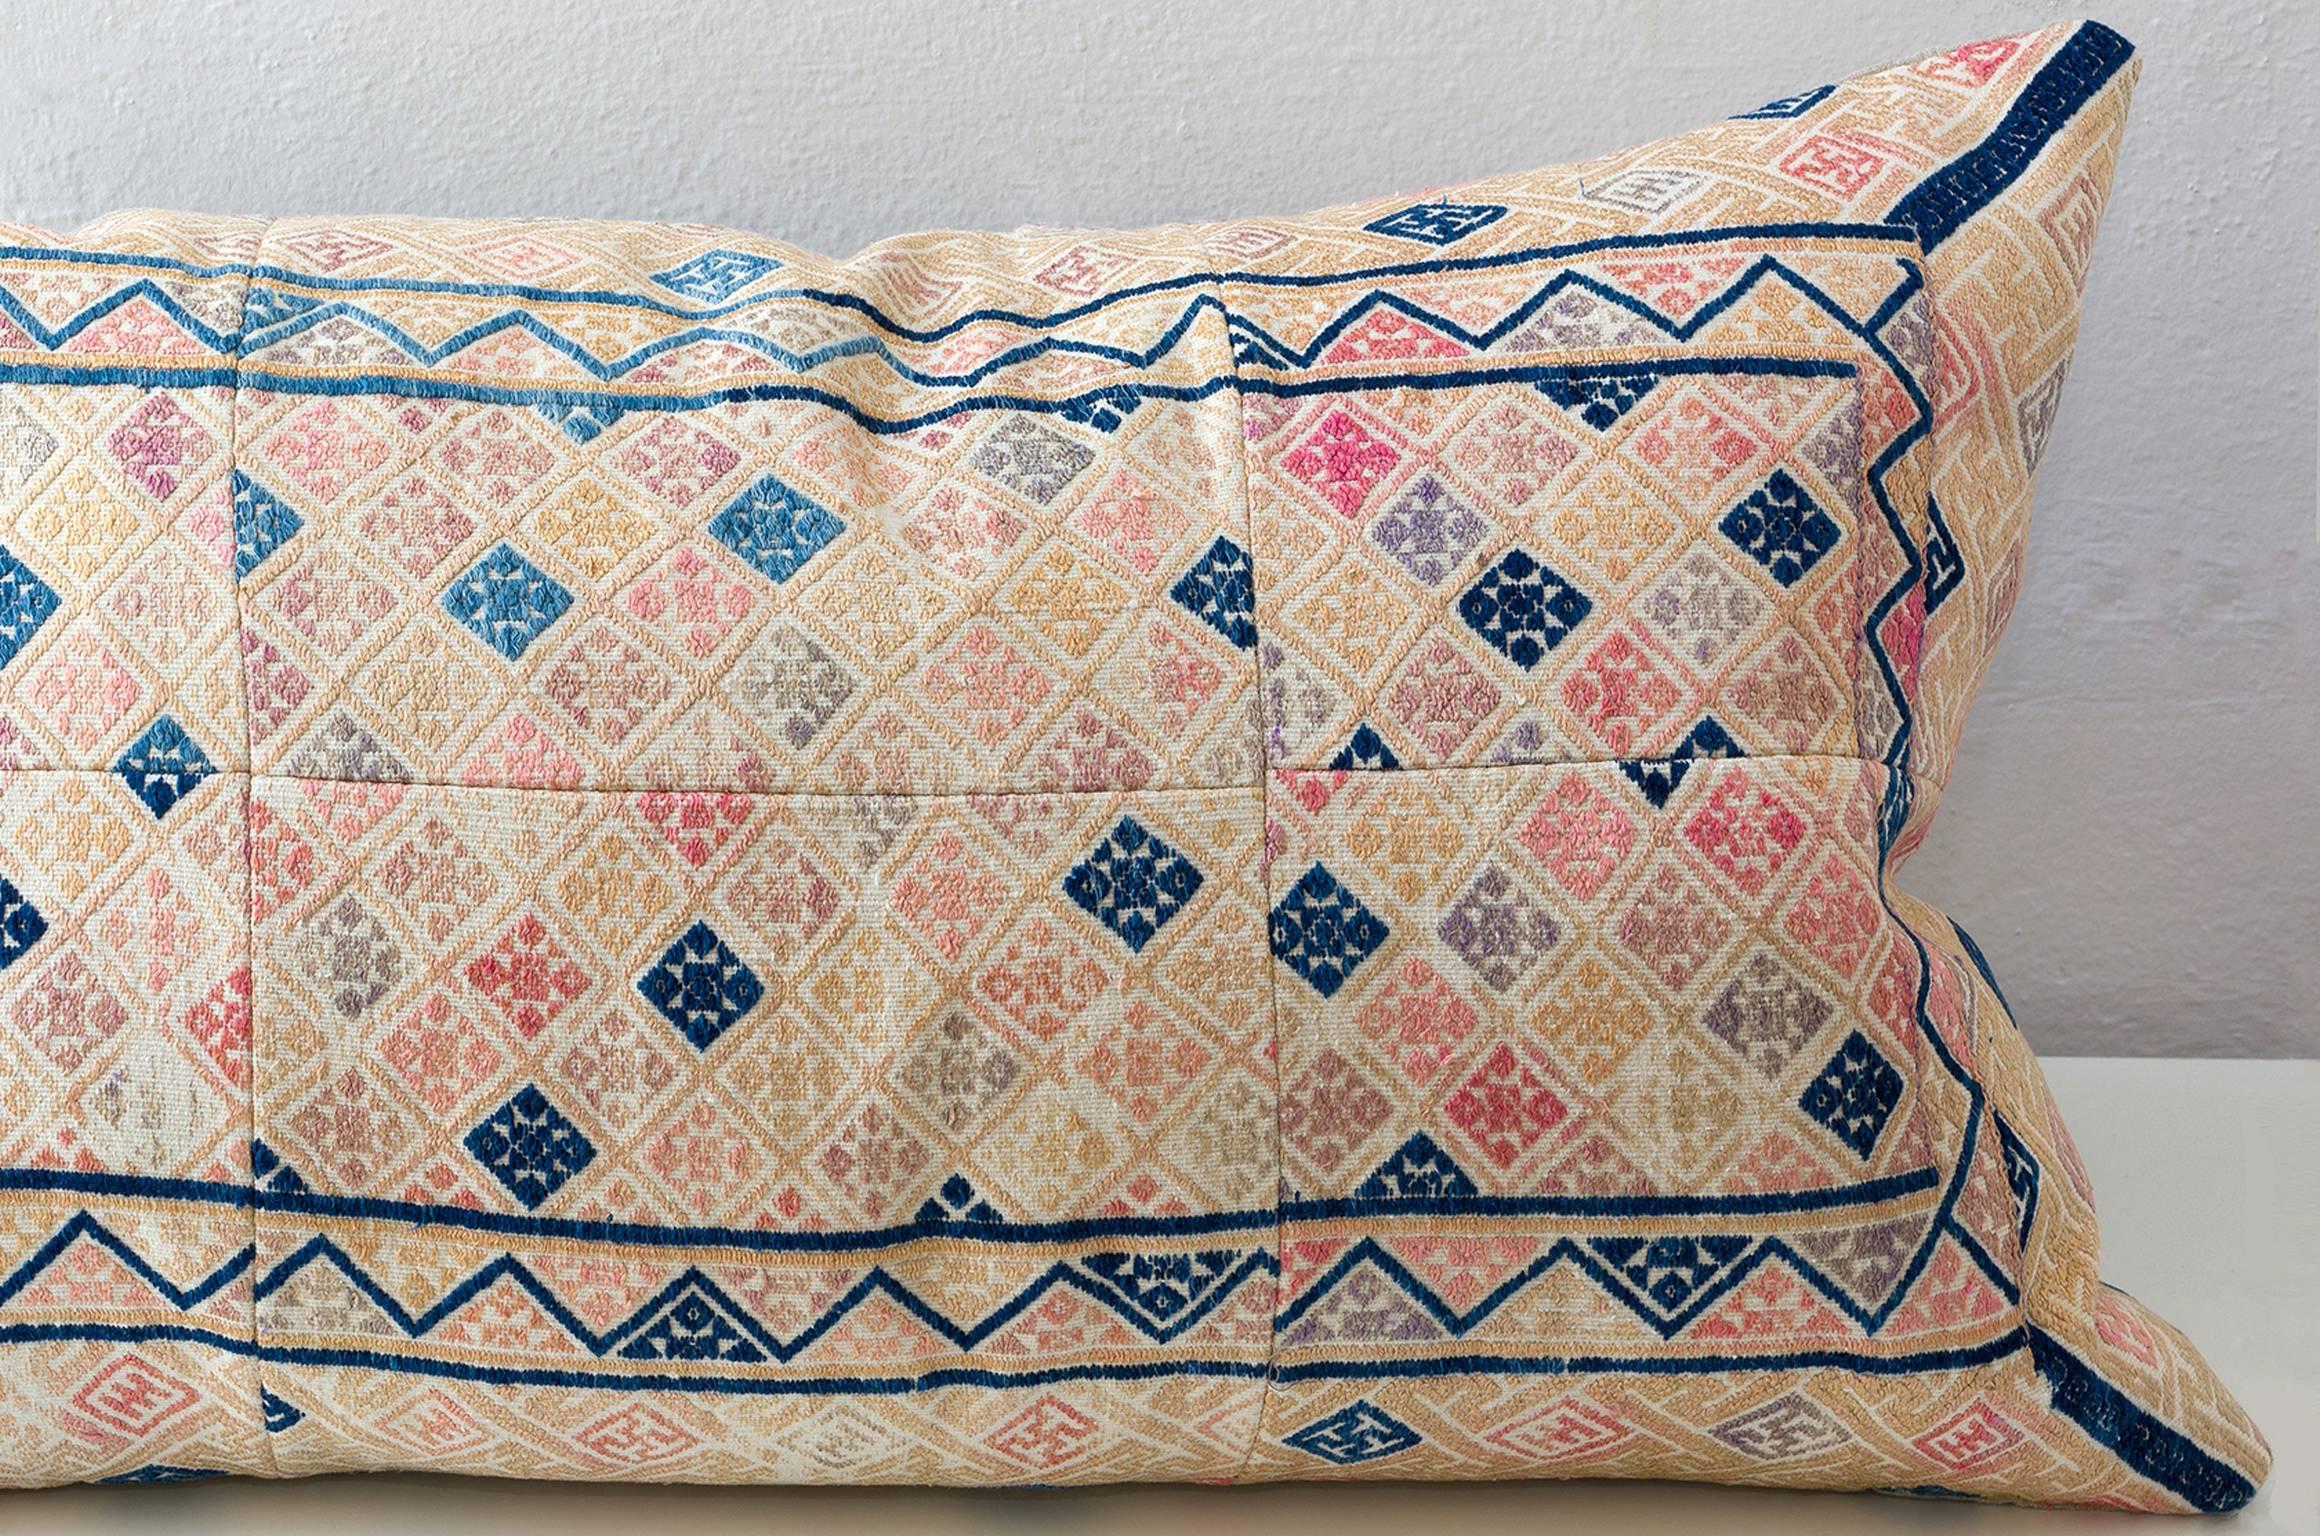 Zhuang piecework cushion in pinks with indigo border frame.

Linen on reverse.
75/25 goose feather and down inserts.
Concealed zippers.
Please inquire for pillows in coordinating fabrics.